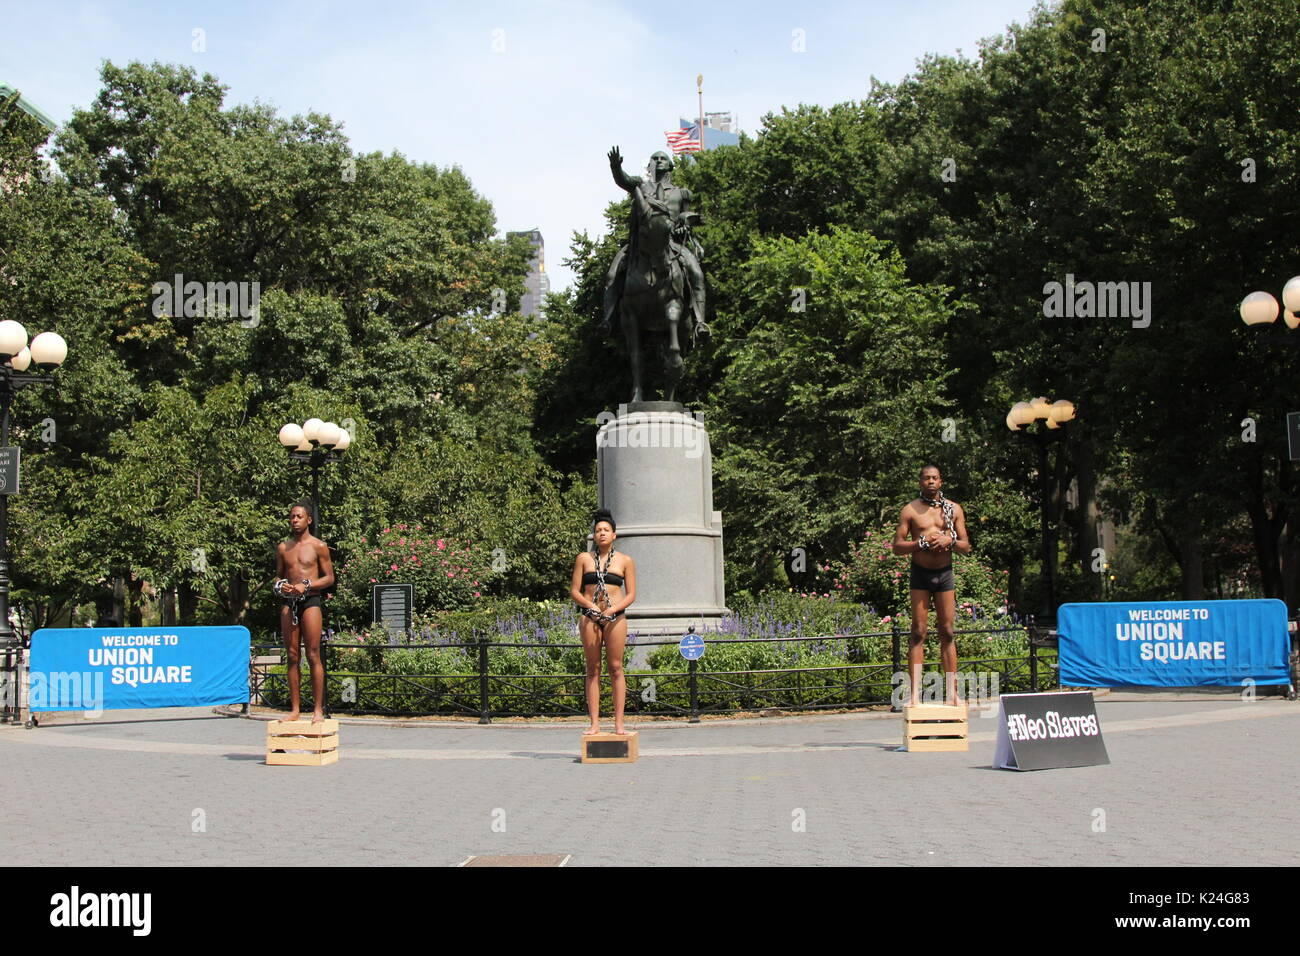 New York, NY, USA. 28th. Aug, 2017. Activists under #NeoSlaves, protesting racism among the growing movement to remove statues of slave-owning Americans in Union Square, under a statute of George Washington, the first slave-owning US President. © G. Ronald Lopez /DigiPixsAgain.us/Alamy Live News Stock Photo